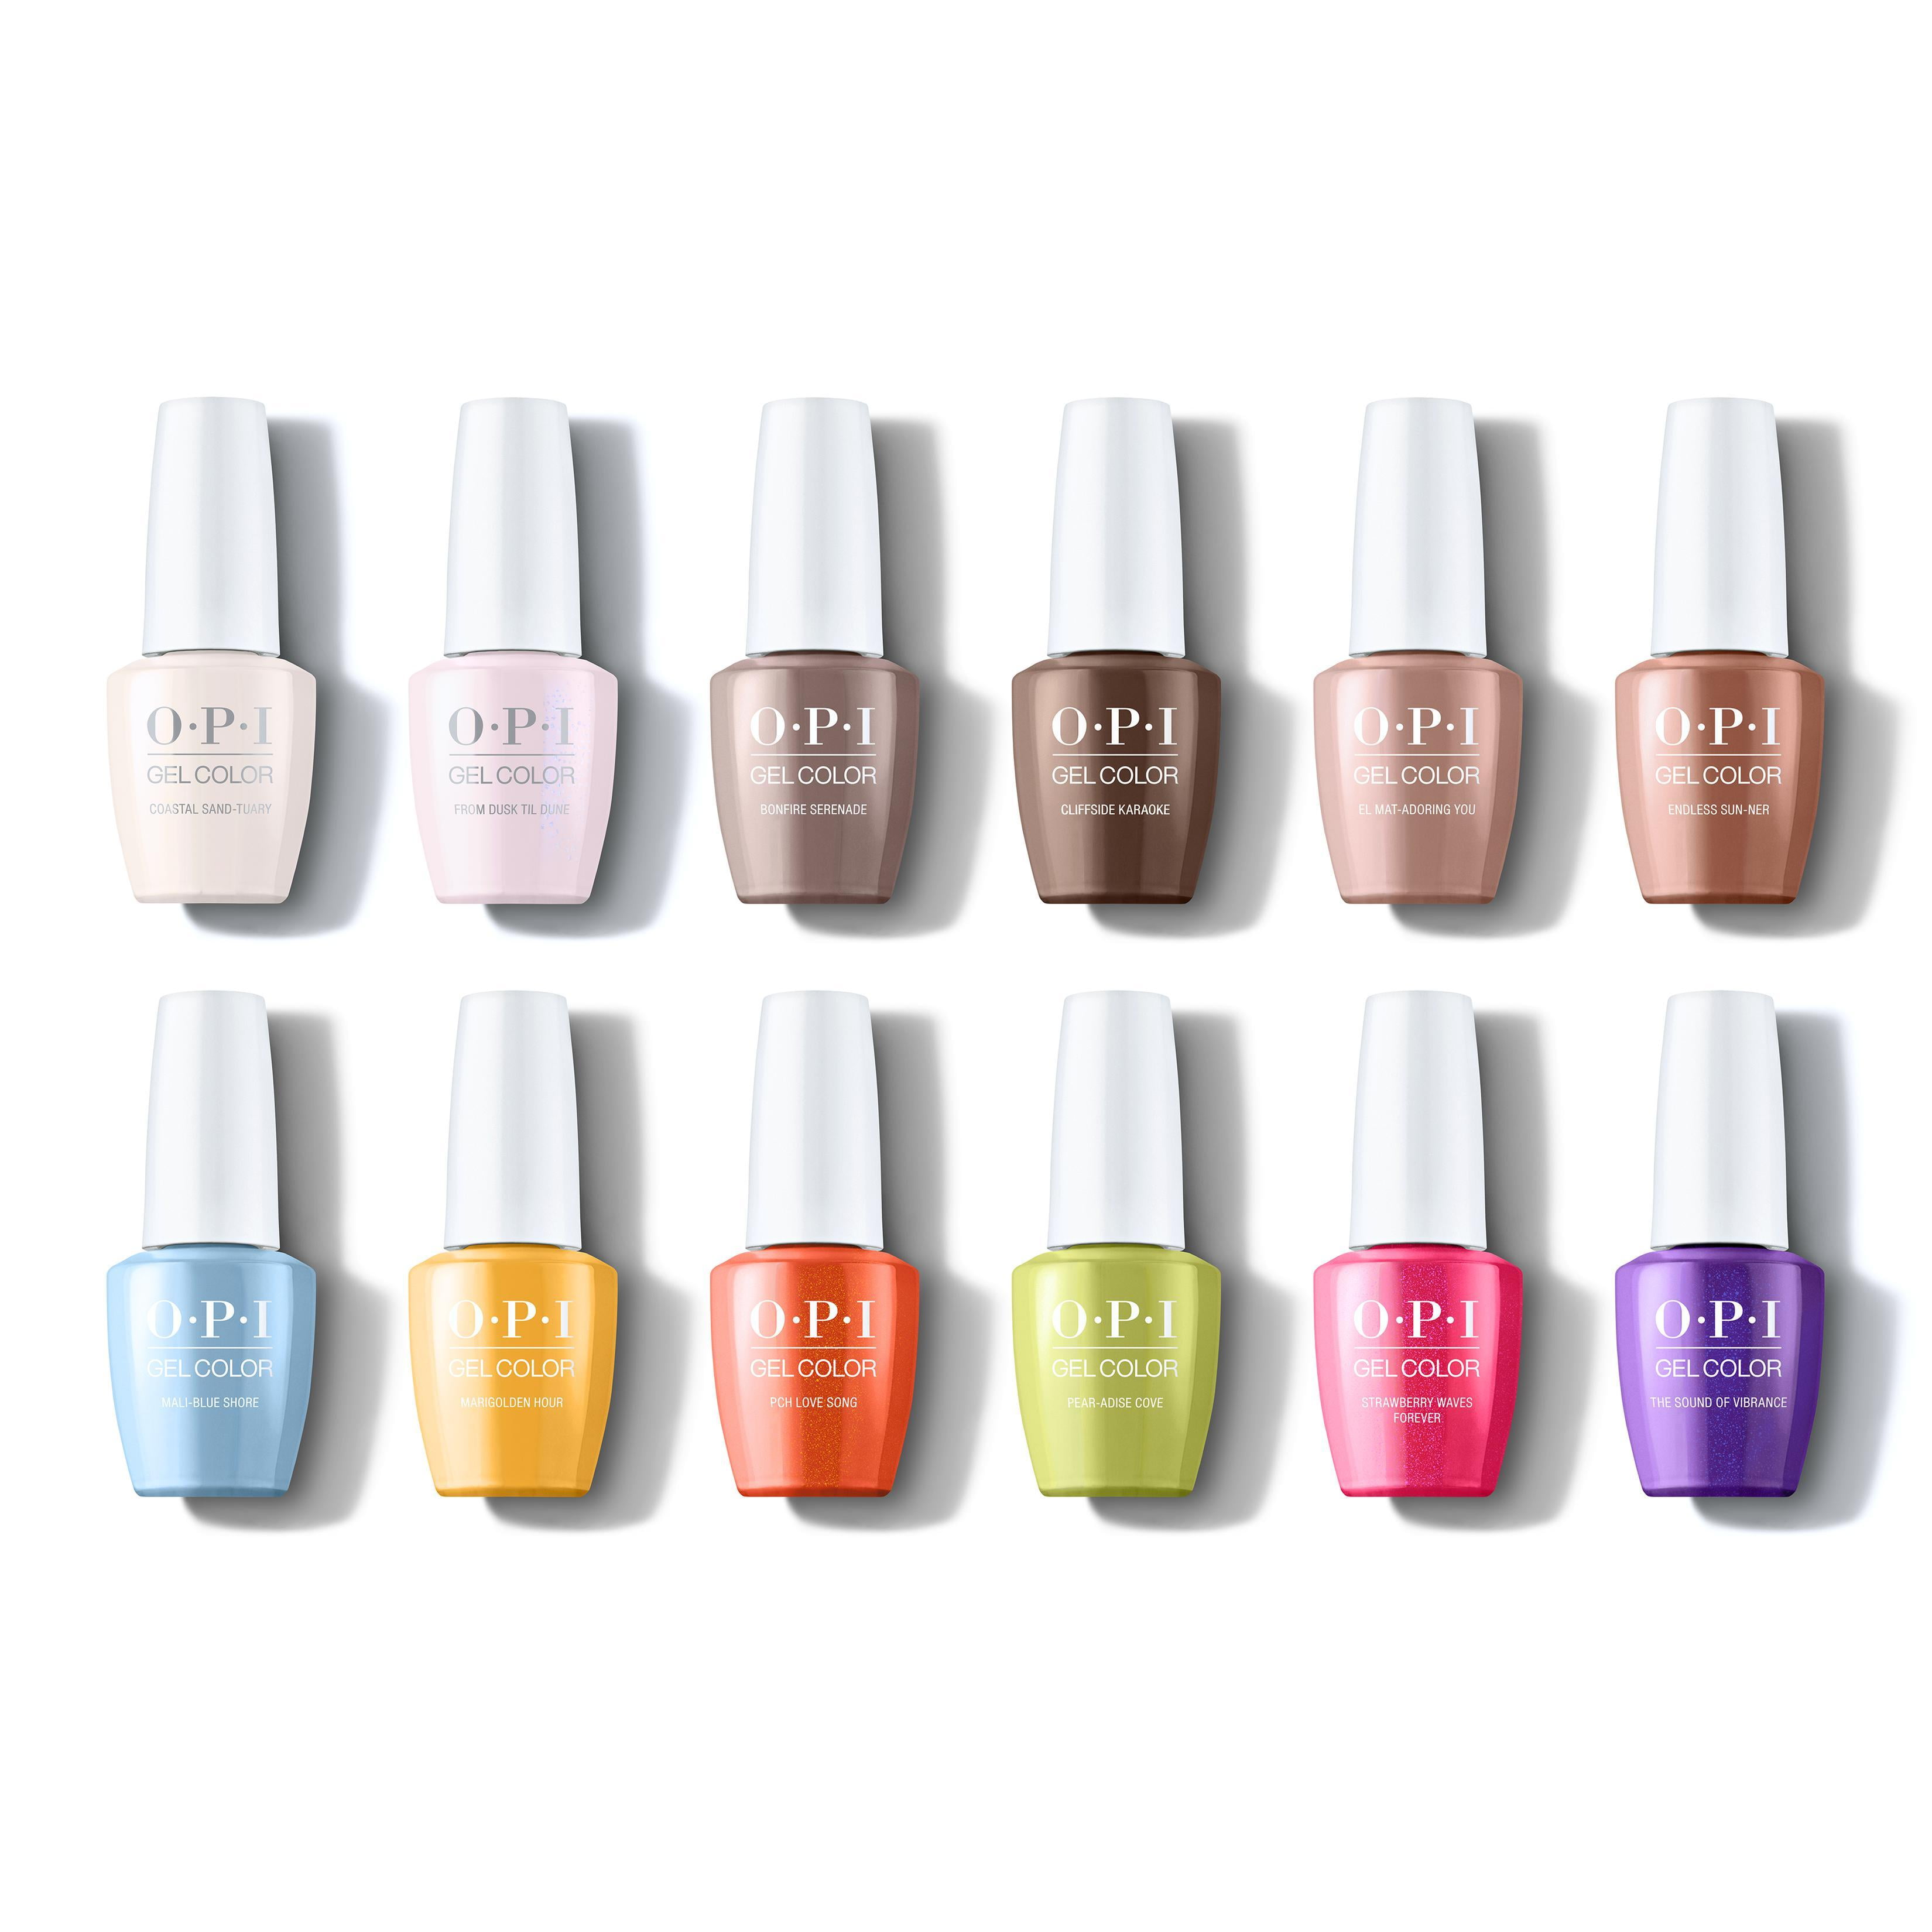 Get Ready For More GelColor Shades! 23 New Iconic OPI Colors Now